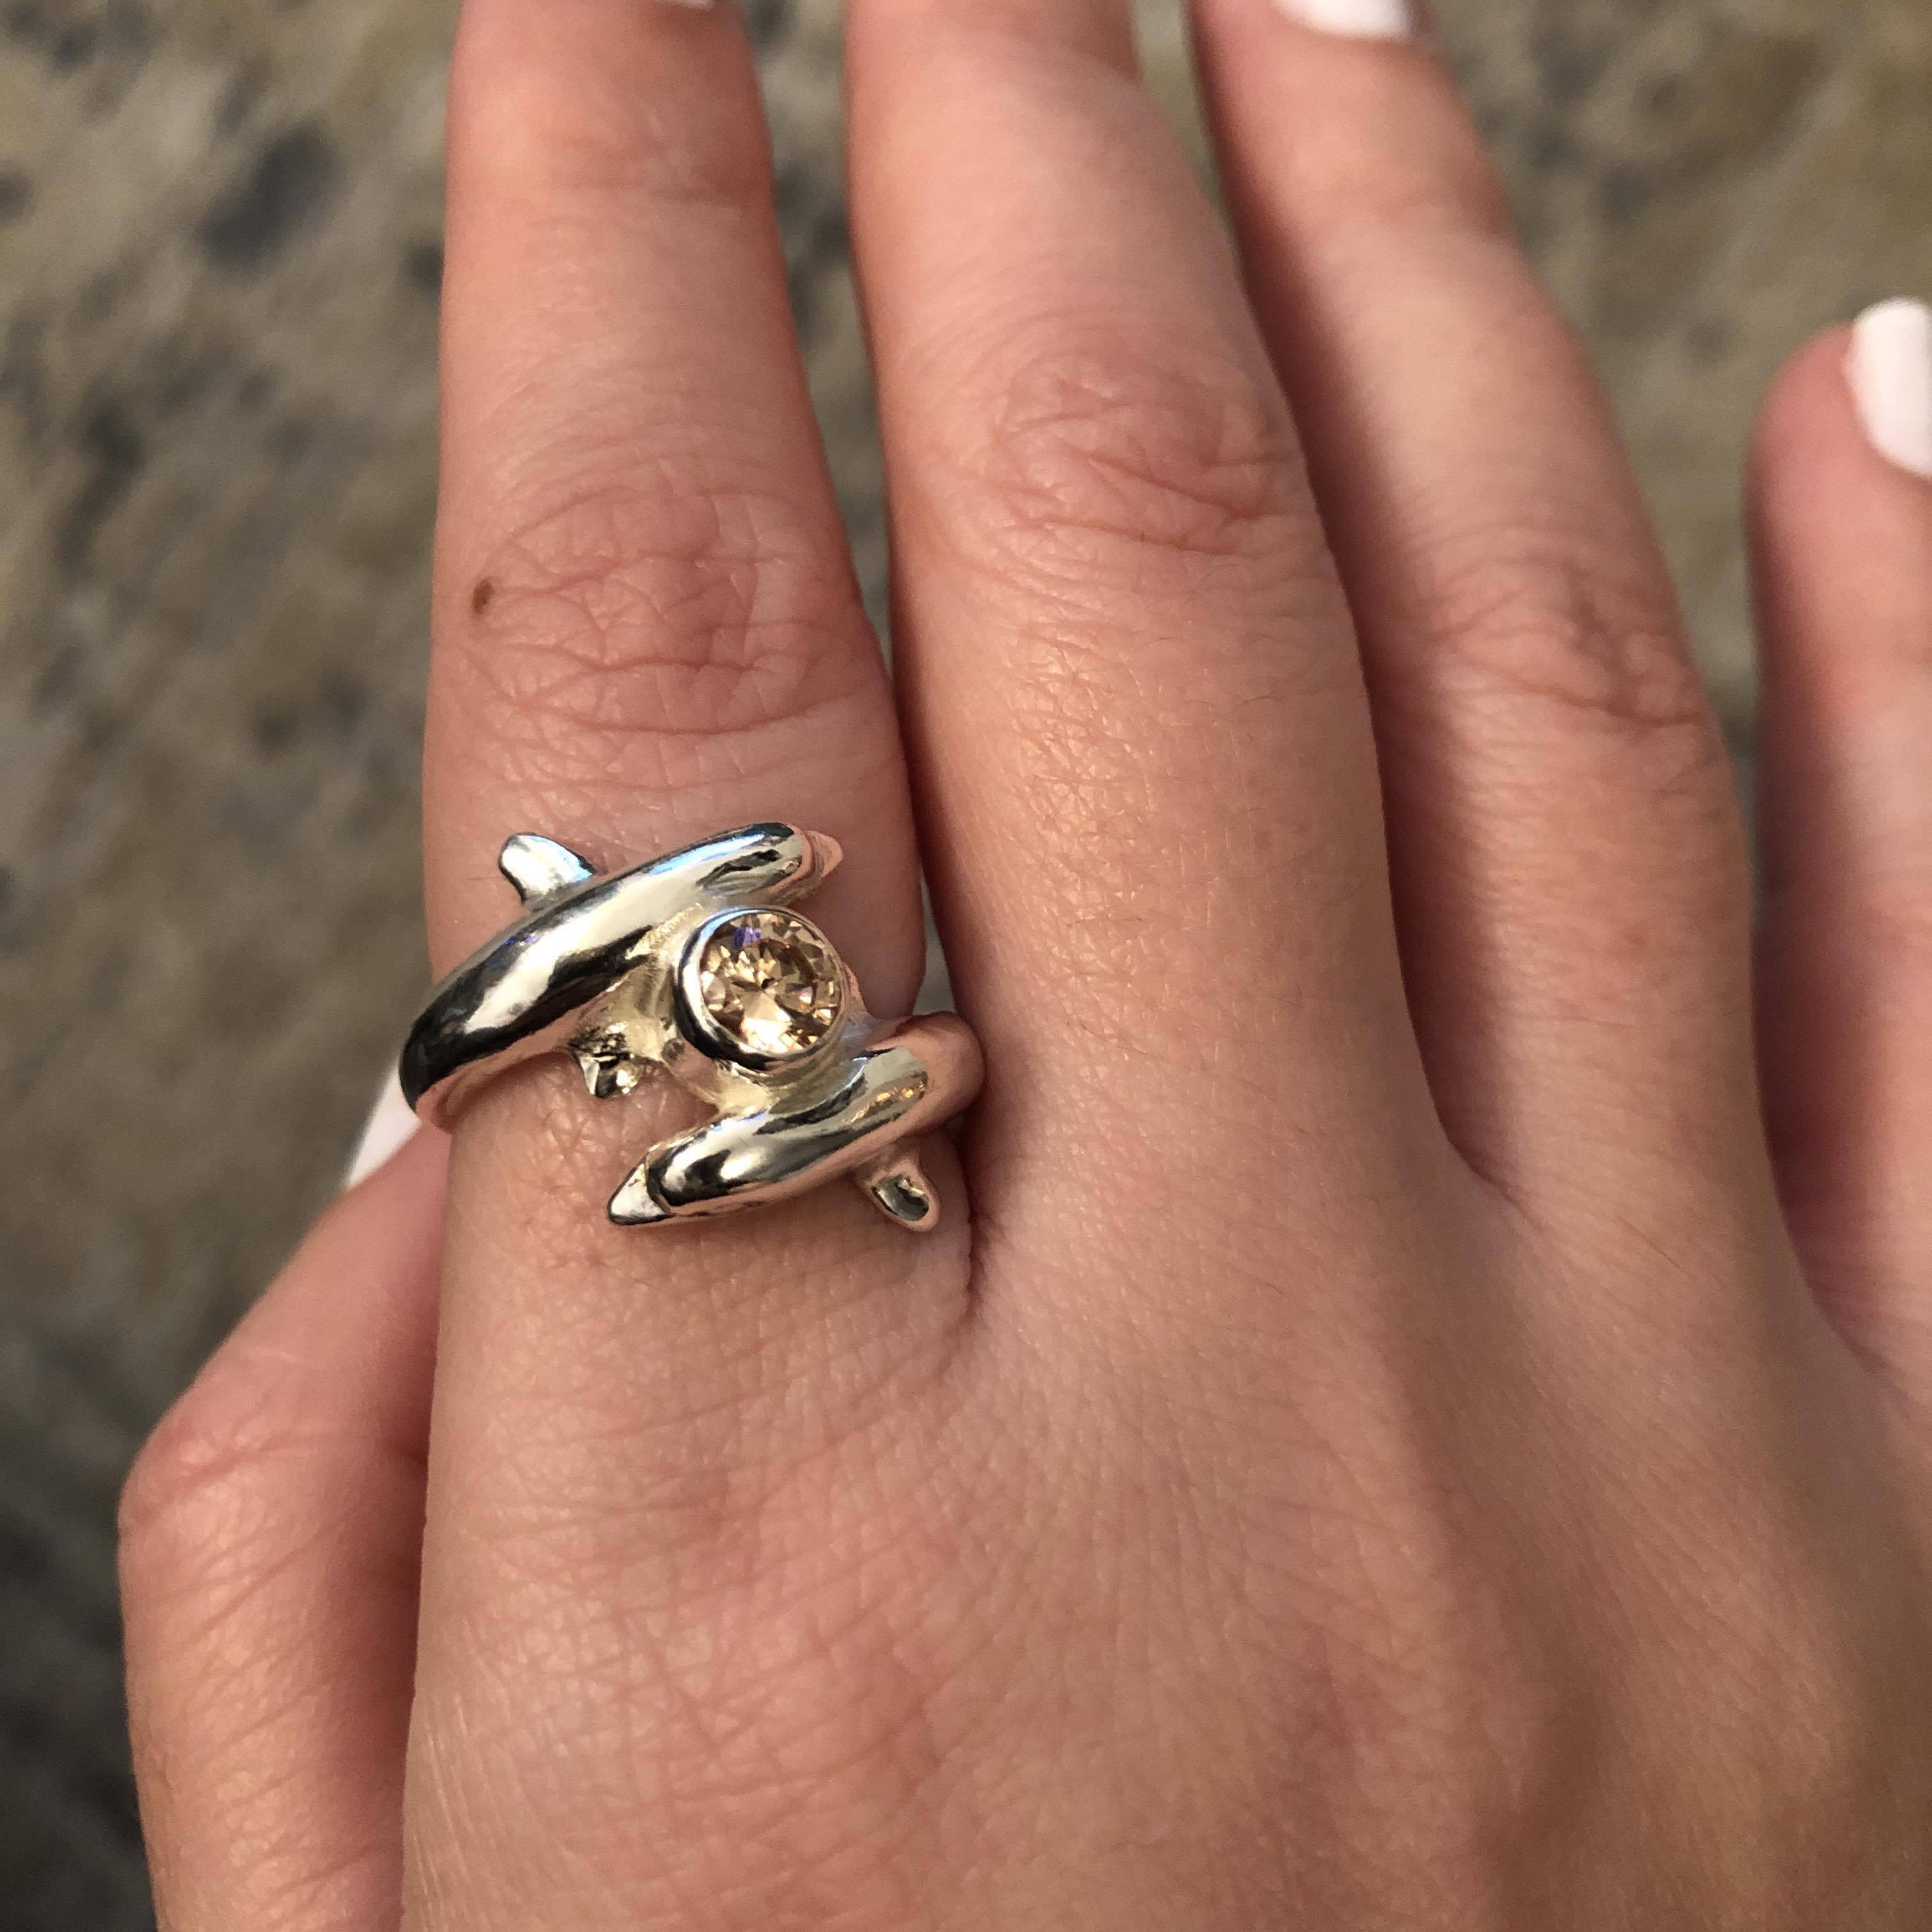 Minoan Dolphins Ring in Sterling Silver (DT-85)